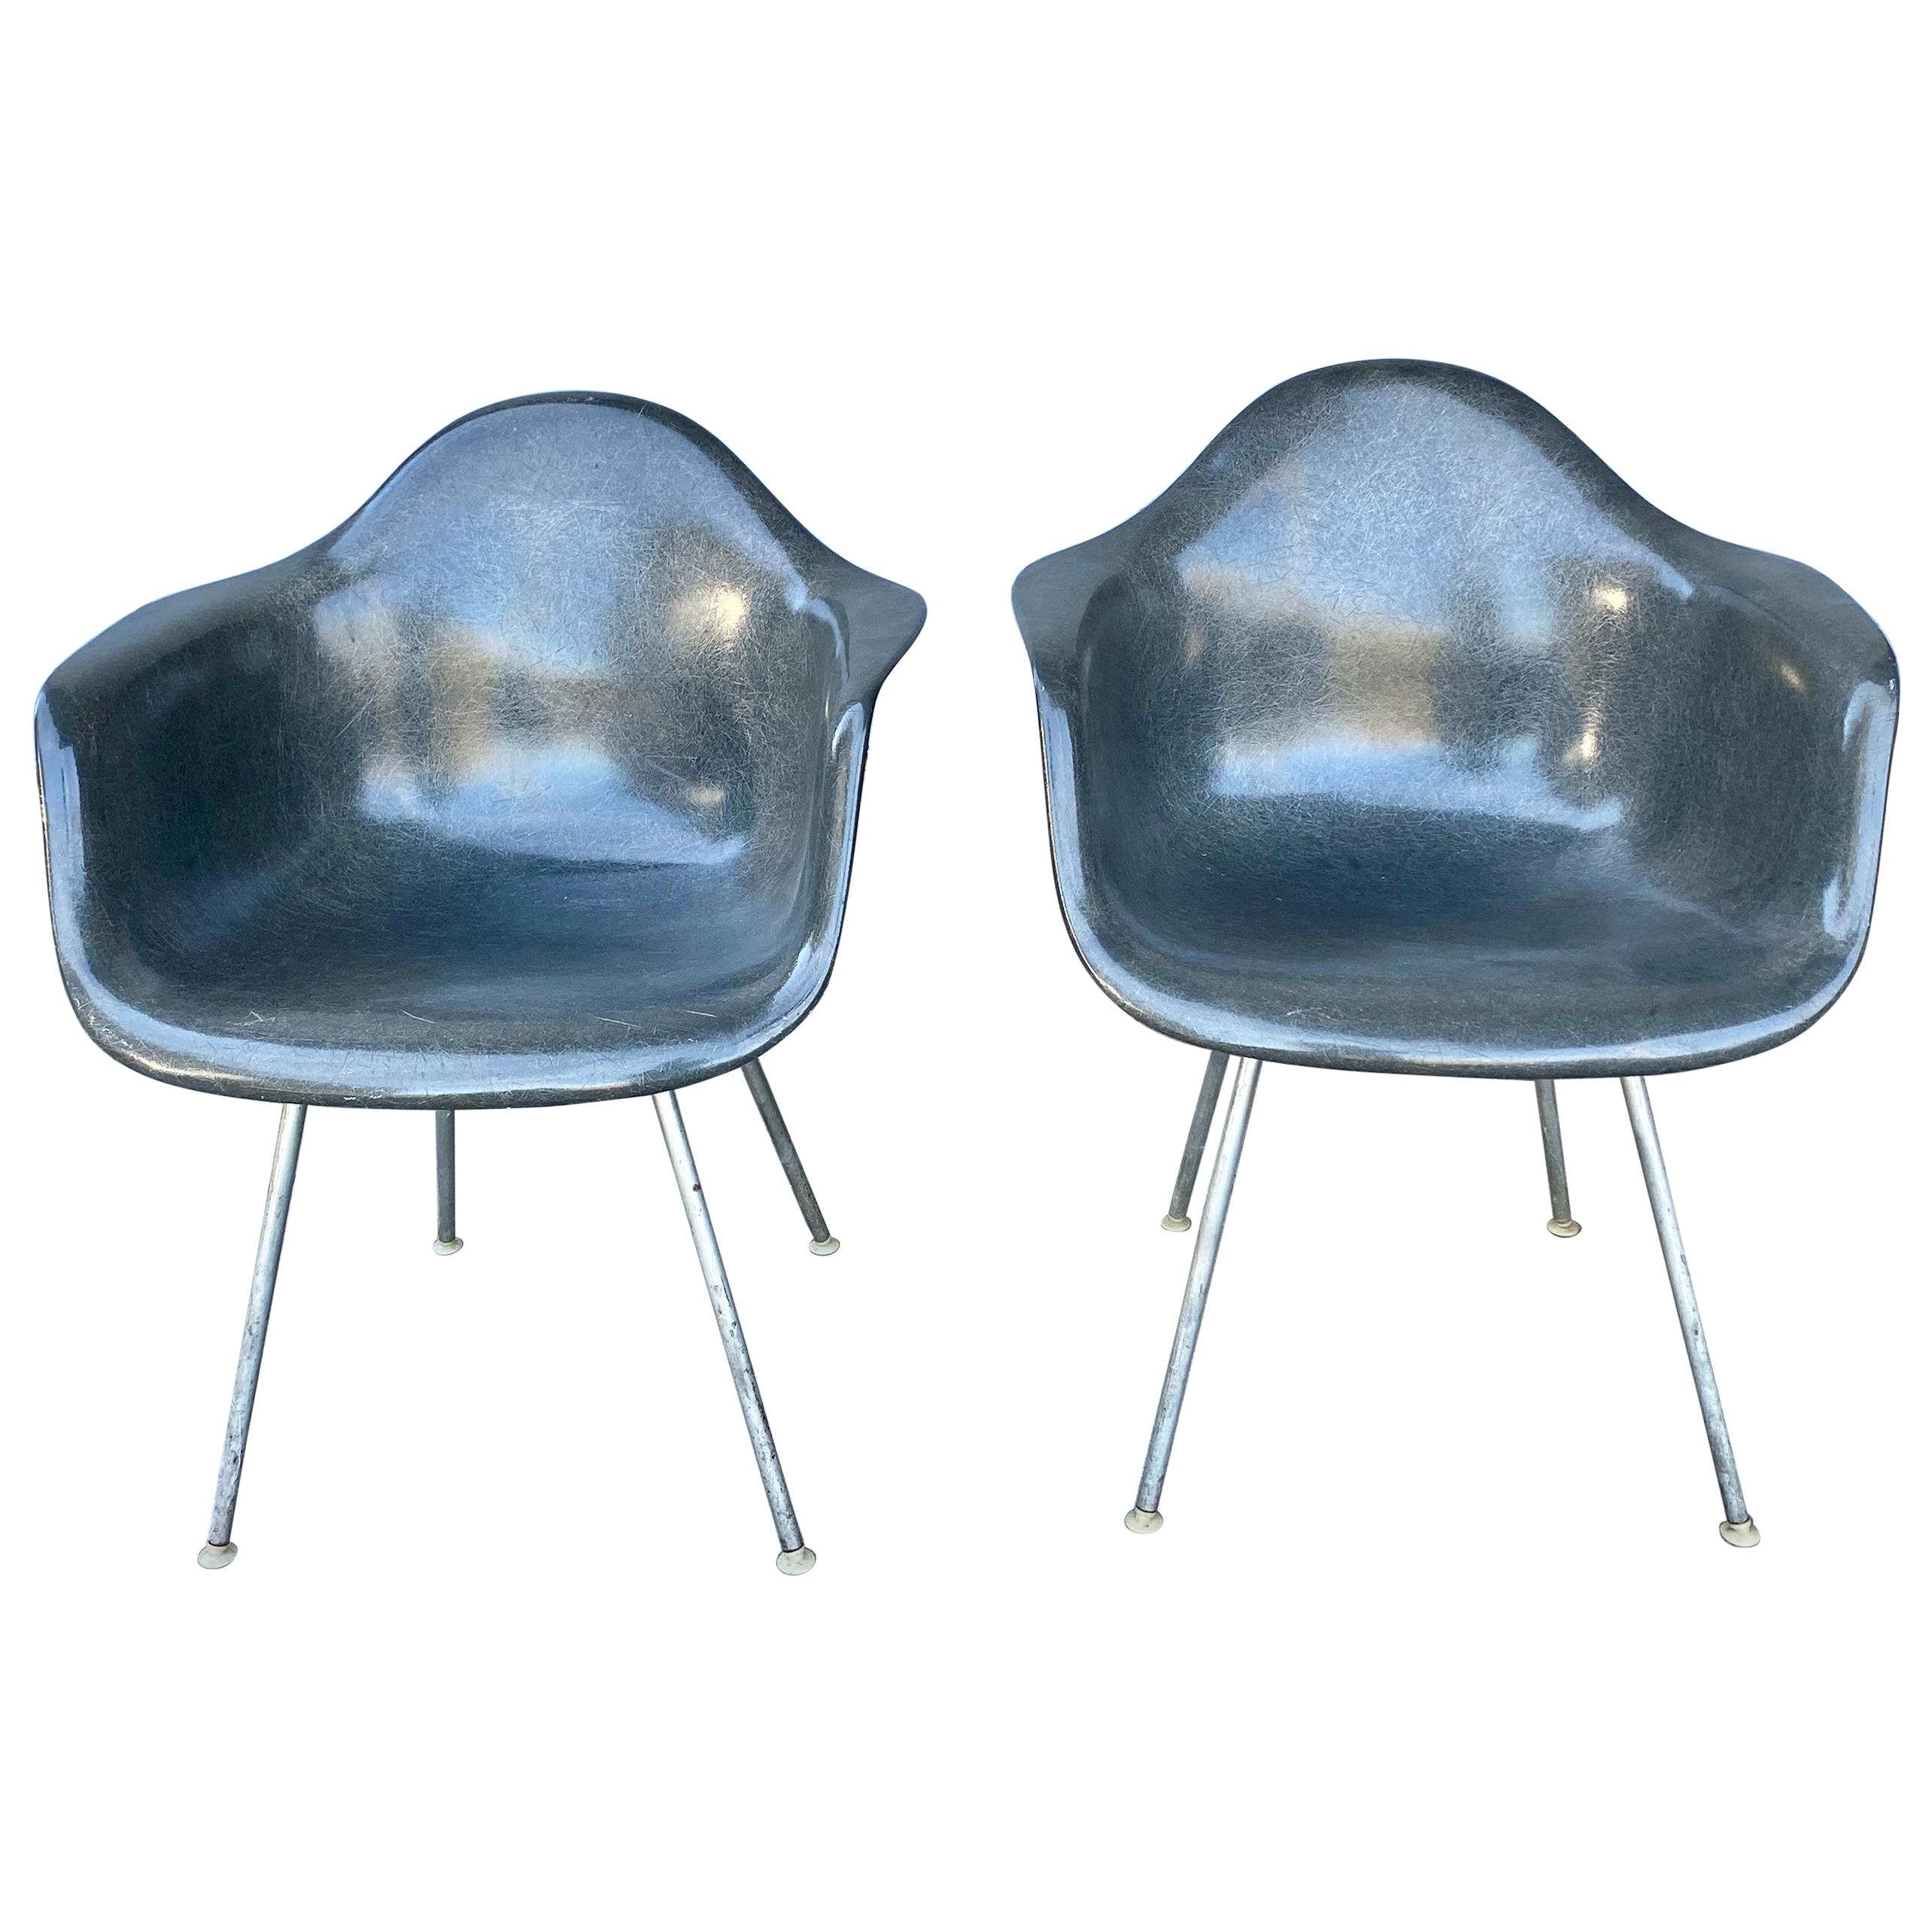 Early Pair of Charles Eames Fiberglass Arm Shell Chairs "Elephant Herman Miller